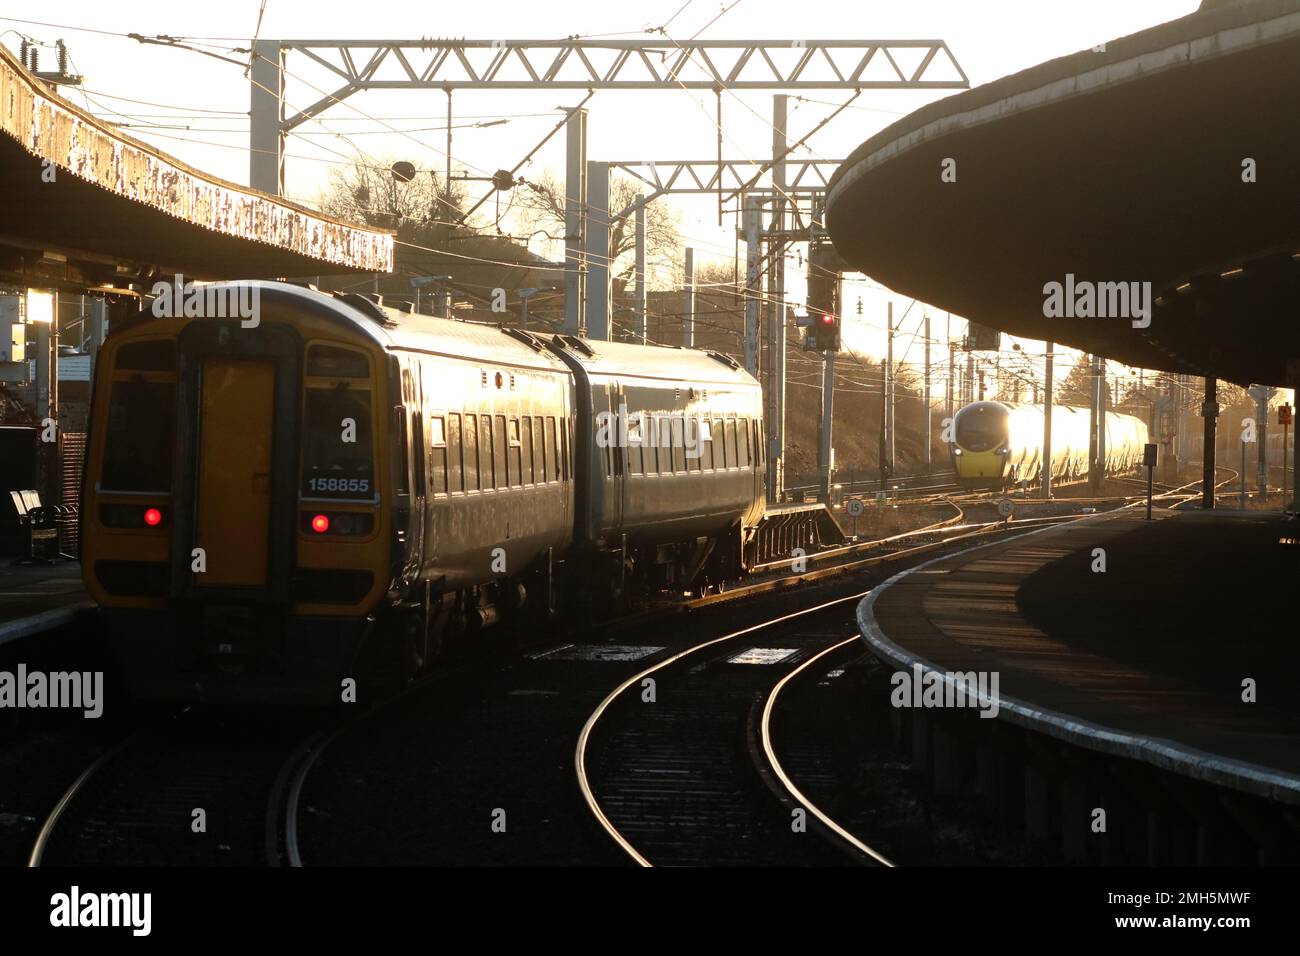 Northern trains express sprinter dmu waiting in Carnforth station, 25th January 2023, while Avanti West Coast pendolino passes on West Coast Main Line. Stock Photo